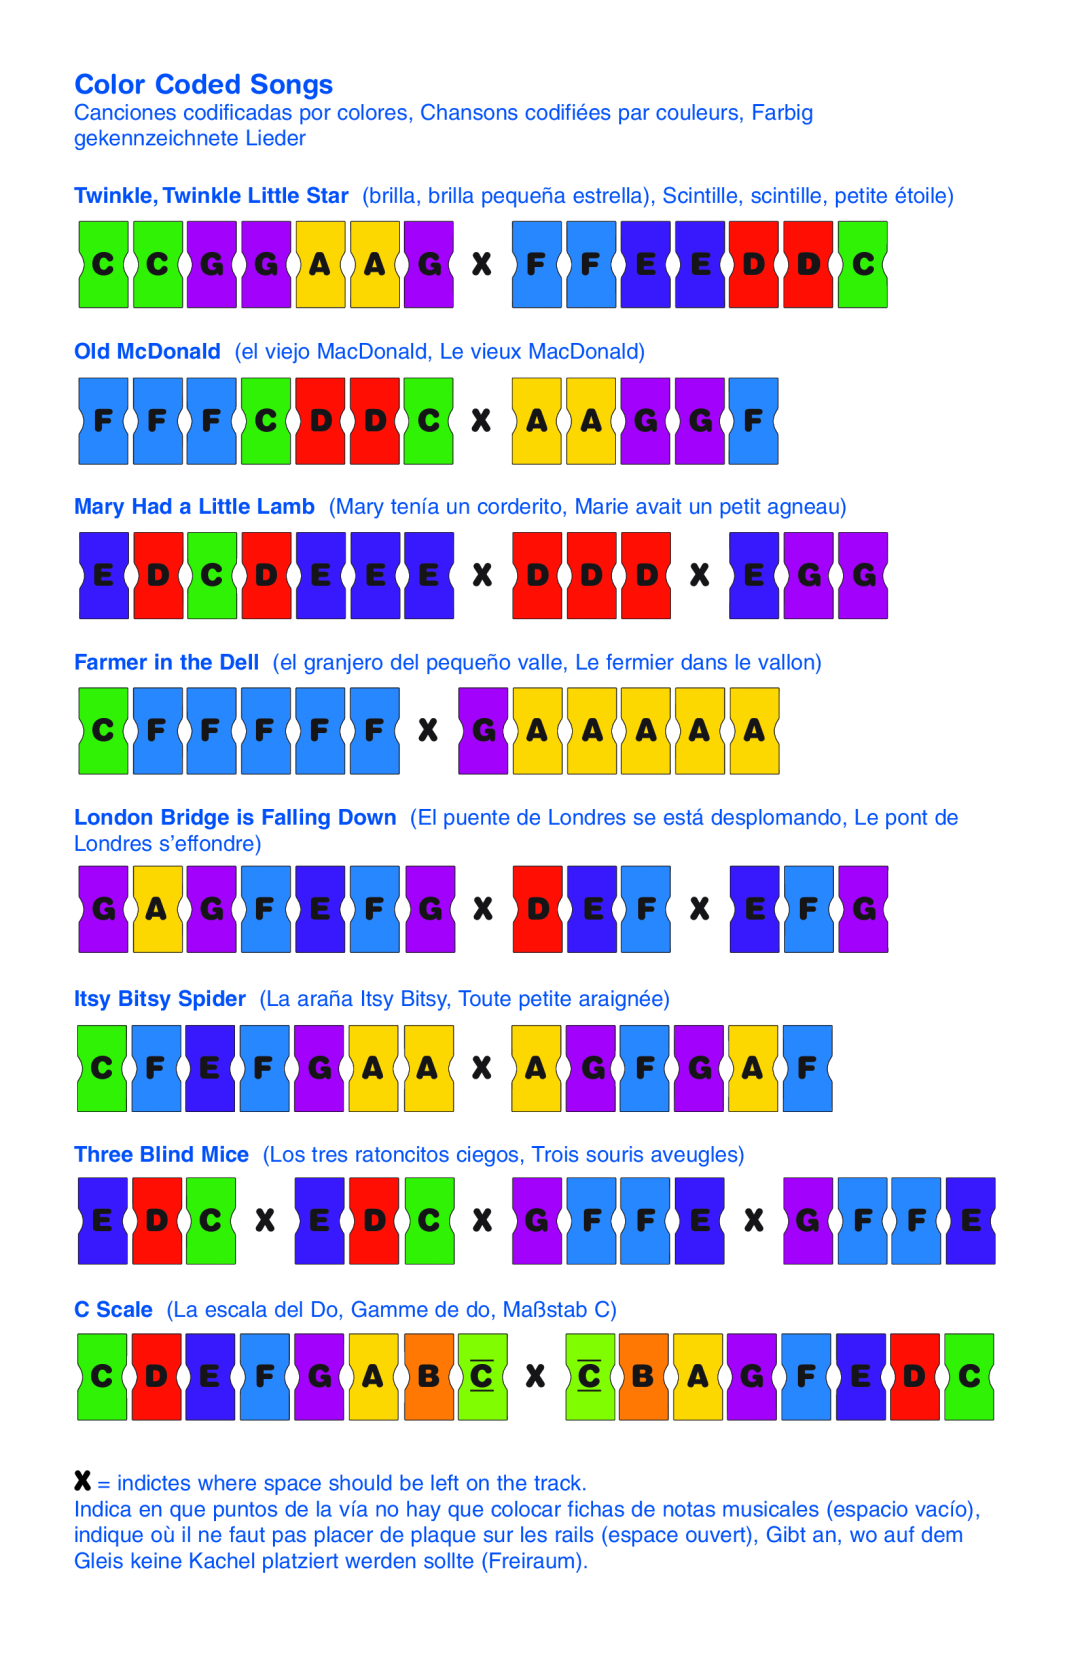 Learning Resources LER 6886 manual Color Coded Songs, C C G G A A G X F F E E D D C, F F F C D D C X A A G G F 